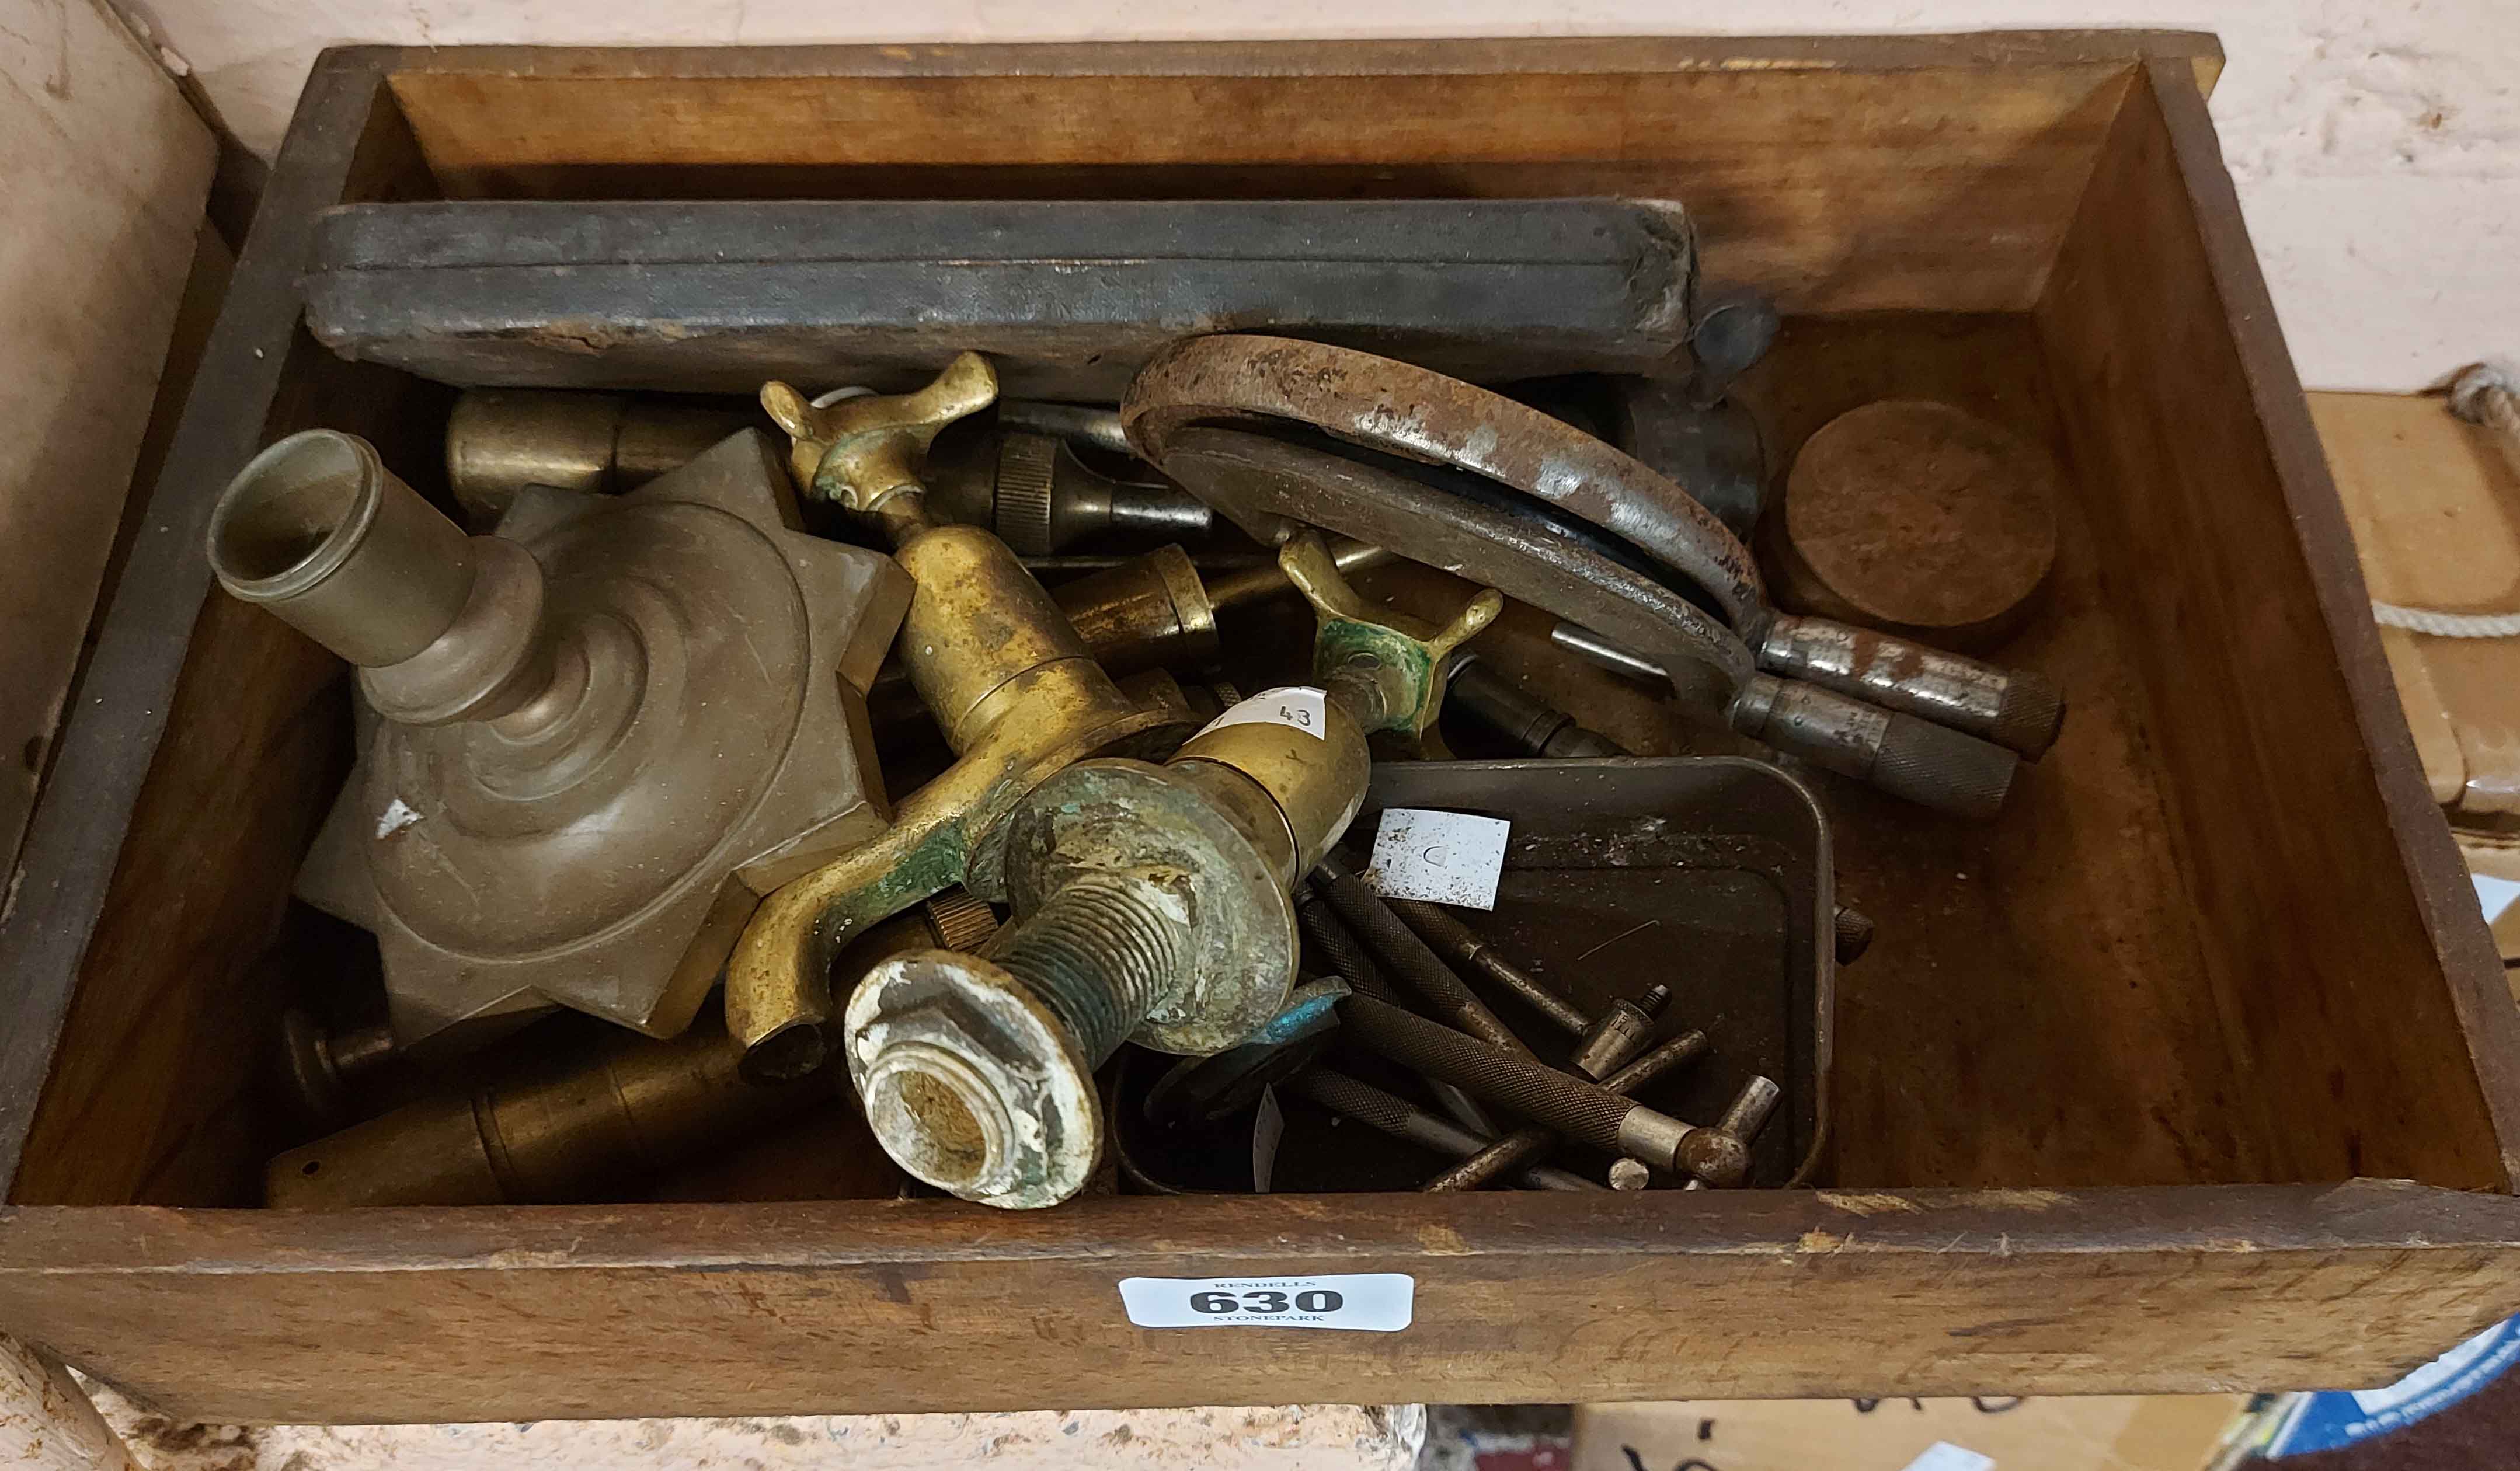 A box containing micrometers, grease guns and brass taps